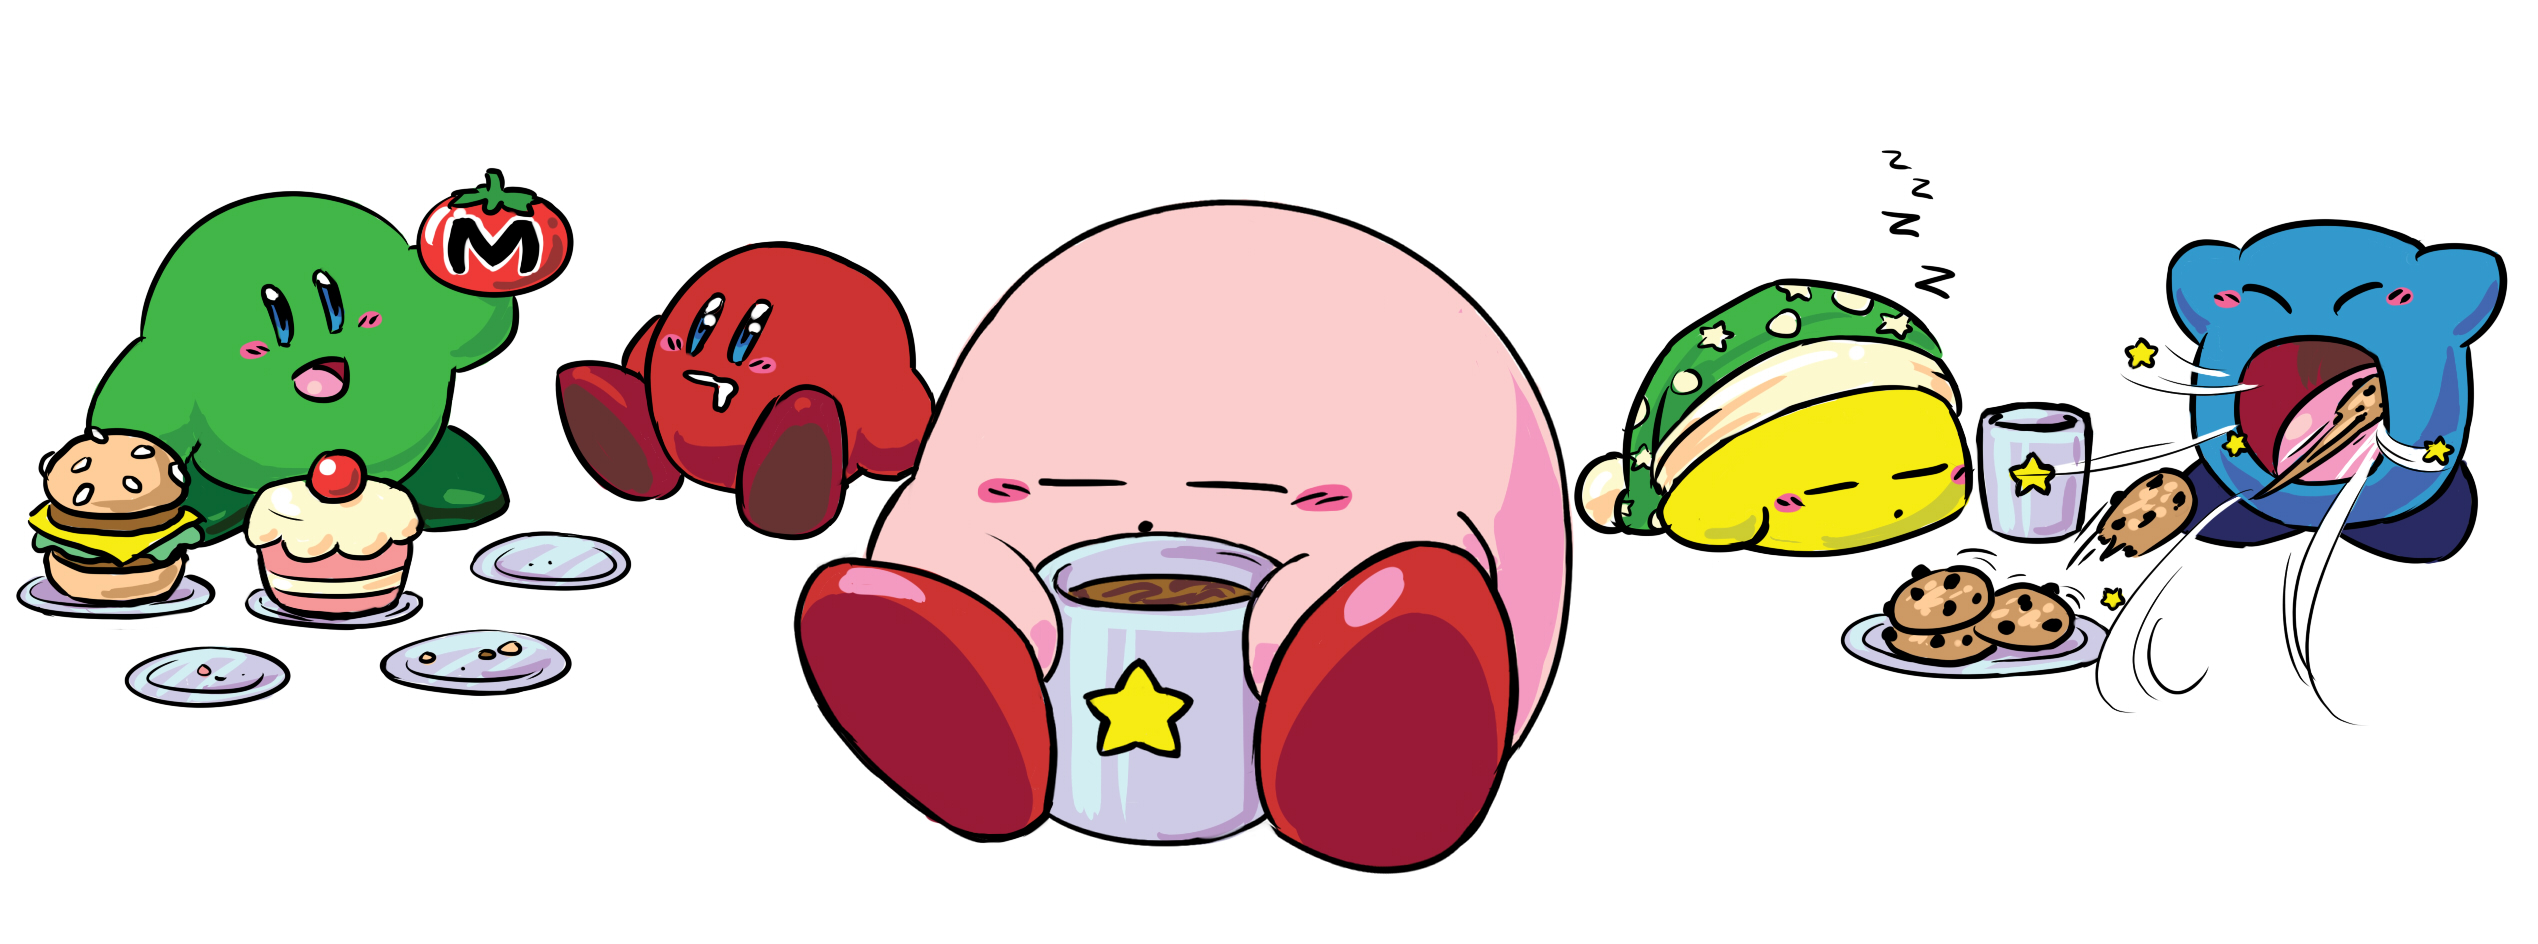 Kirby's Snacktime by Danny Poloskei